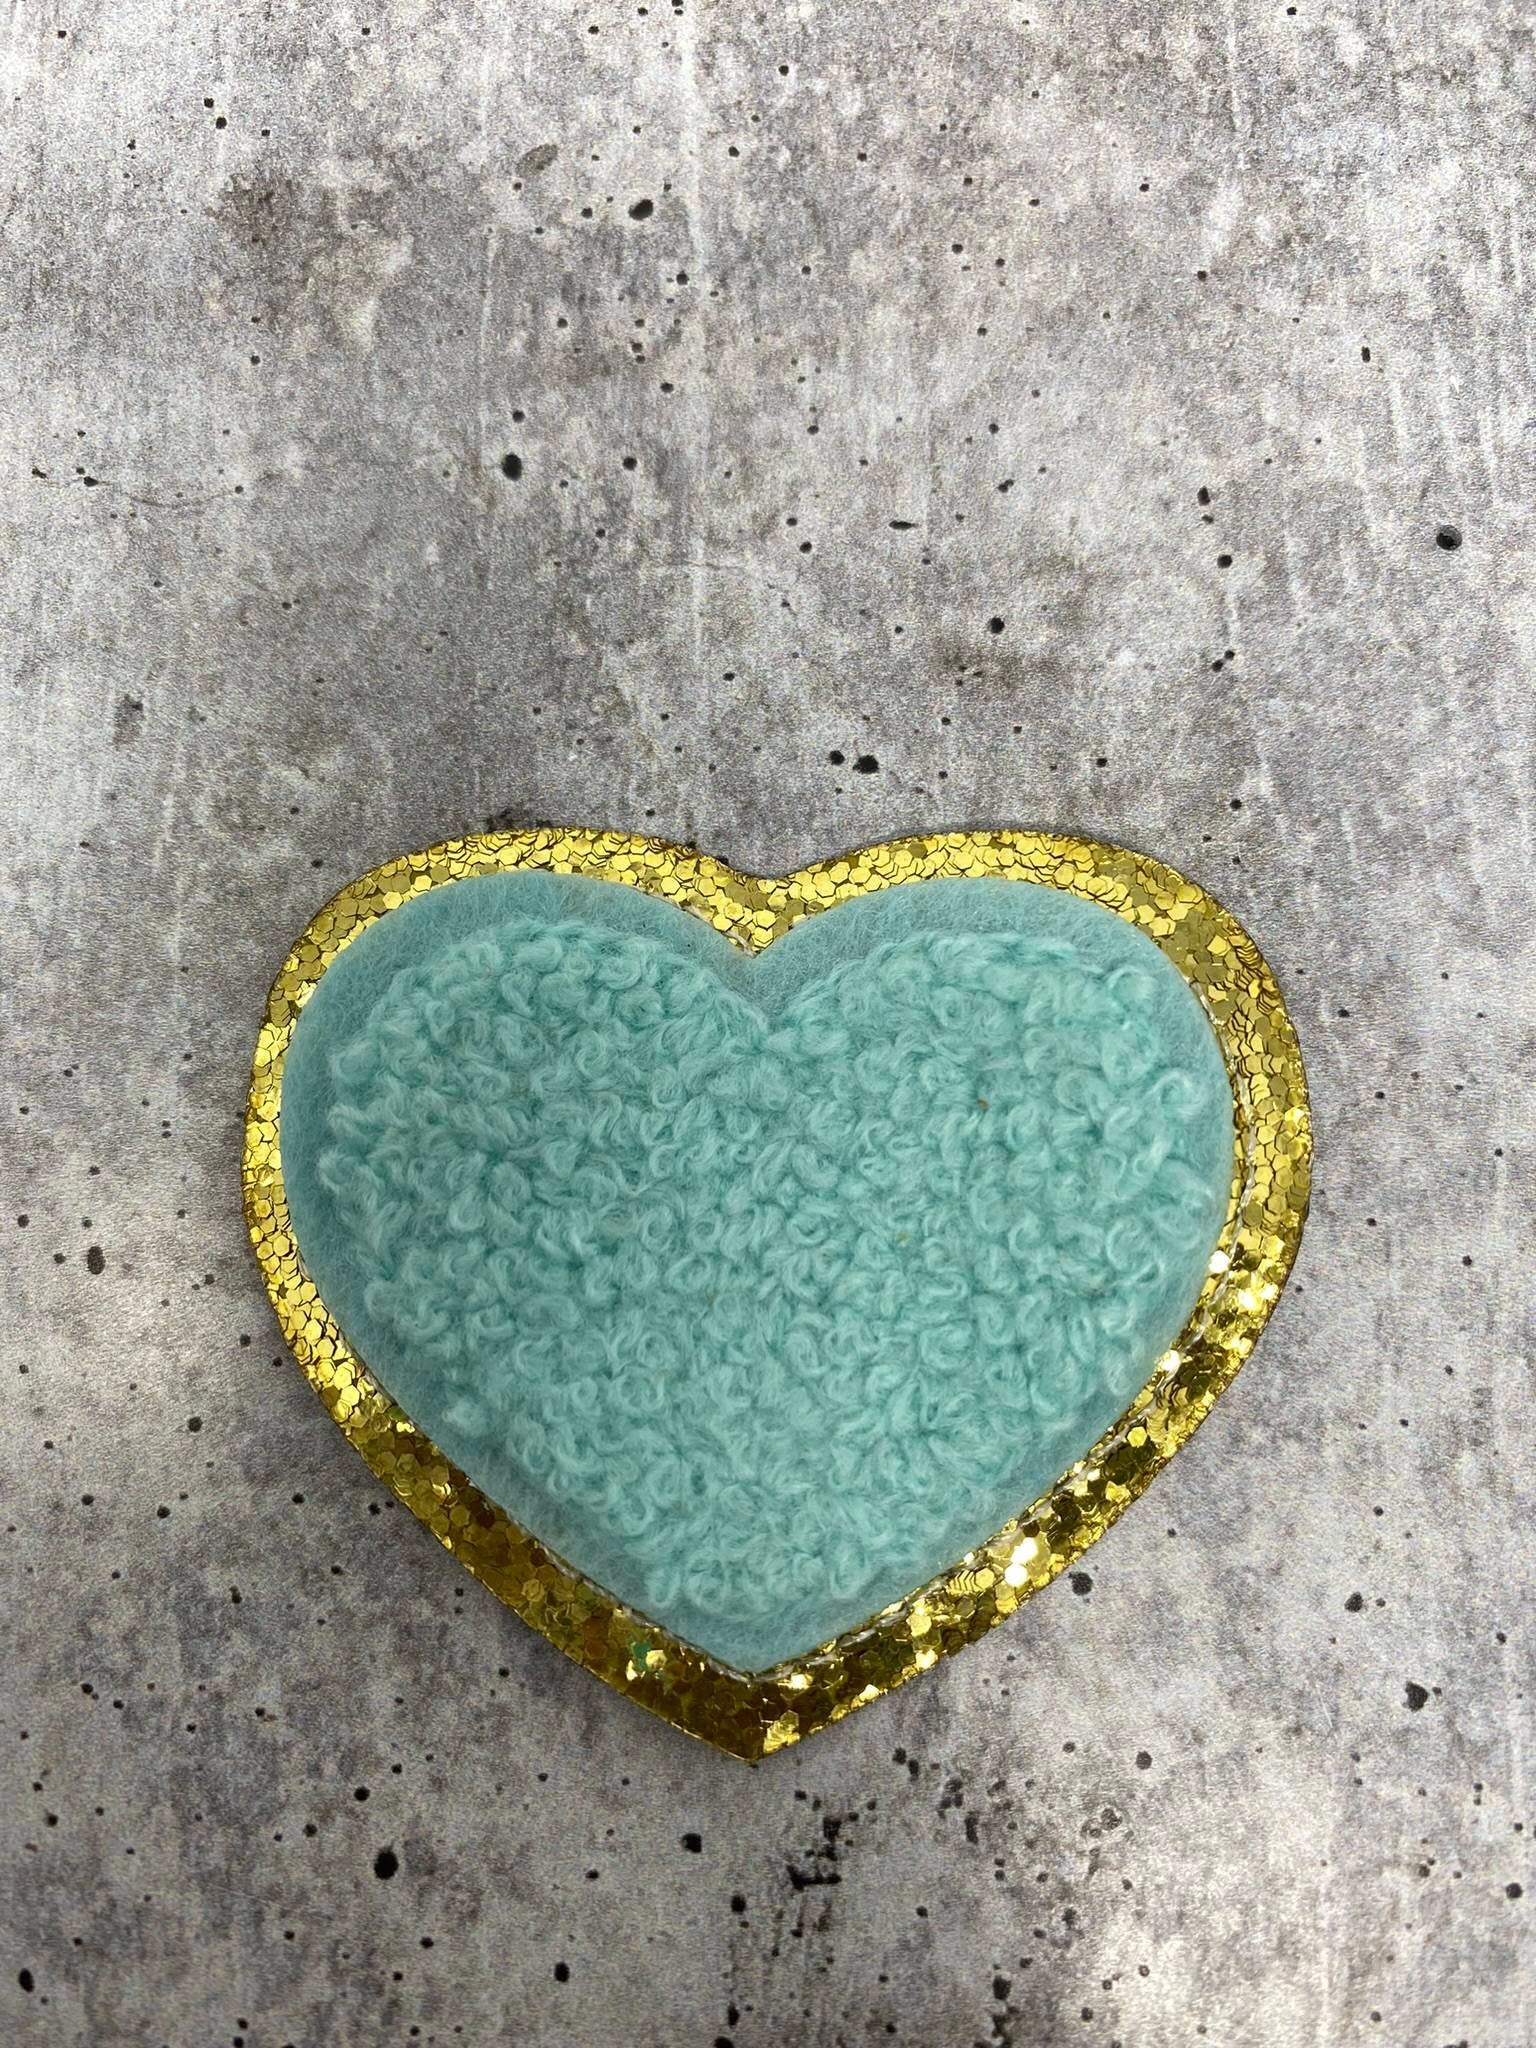 New: Aqua Blue, 1-pc, Chenille "Heart Patch" w/Gold Glitter, Size 2.5", Love Patch w/ Iron-on Backing, Fuzzy Applique, Iron-on Patch